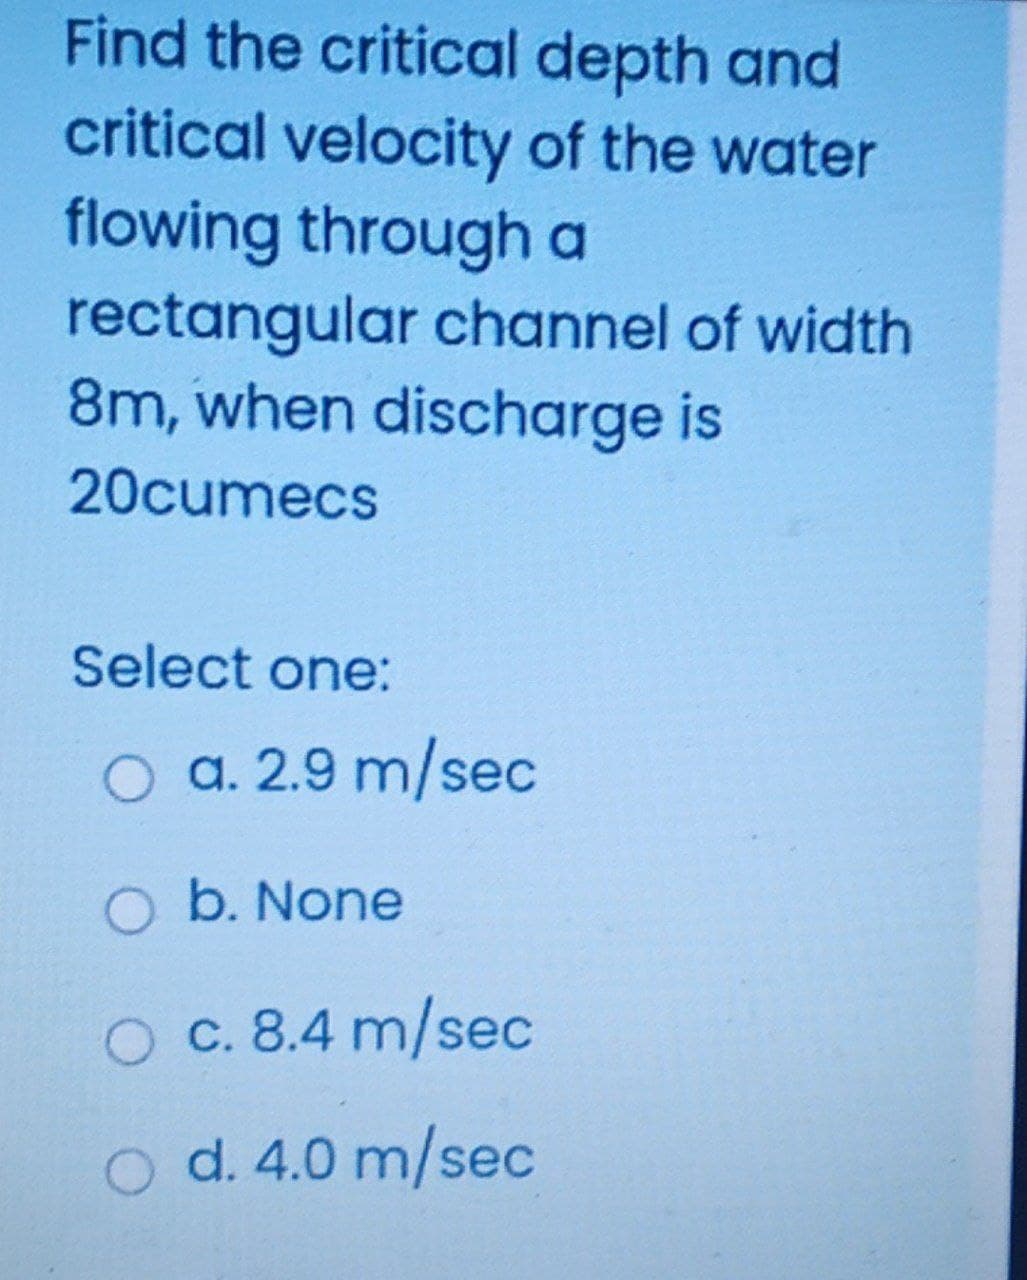 Find the critical depth and
critical velocity of the water
flowing through a
rectangular channel of width
8m, when discharge is
20cumecs
Select one:
a. 2.9 m/sec
b. None
O c. 8.4 m/sec
O d. 4.0 m/sec
